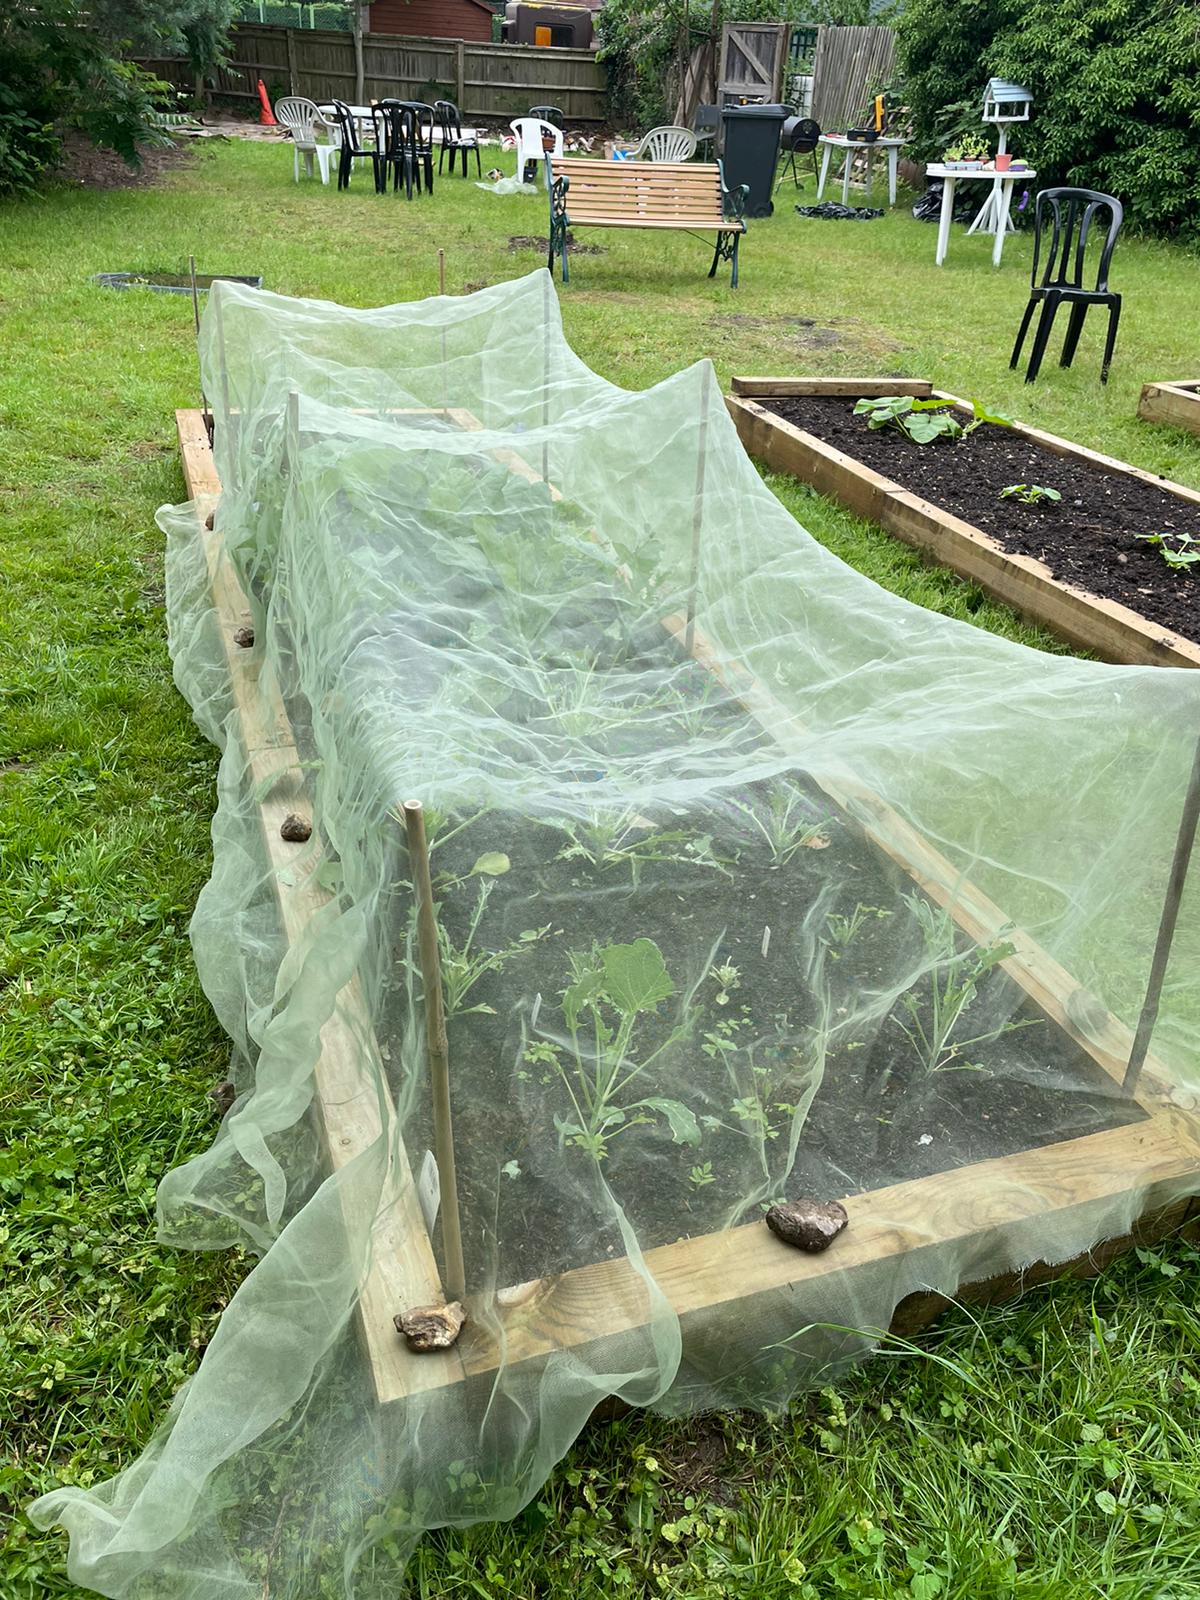 Netting to keep the pesky pests off our lovely veg